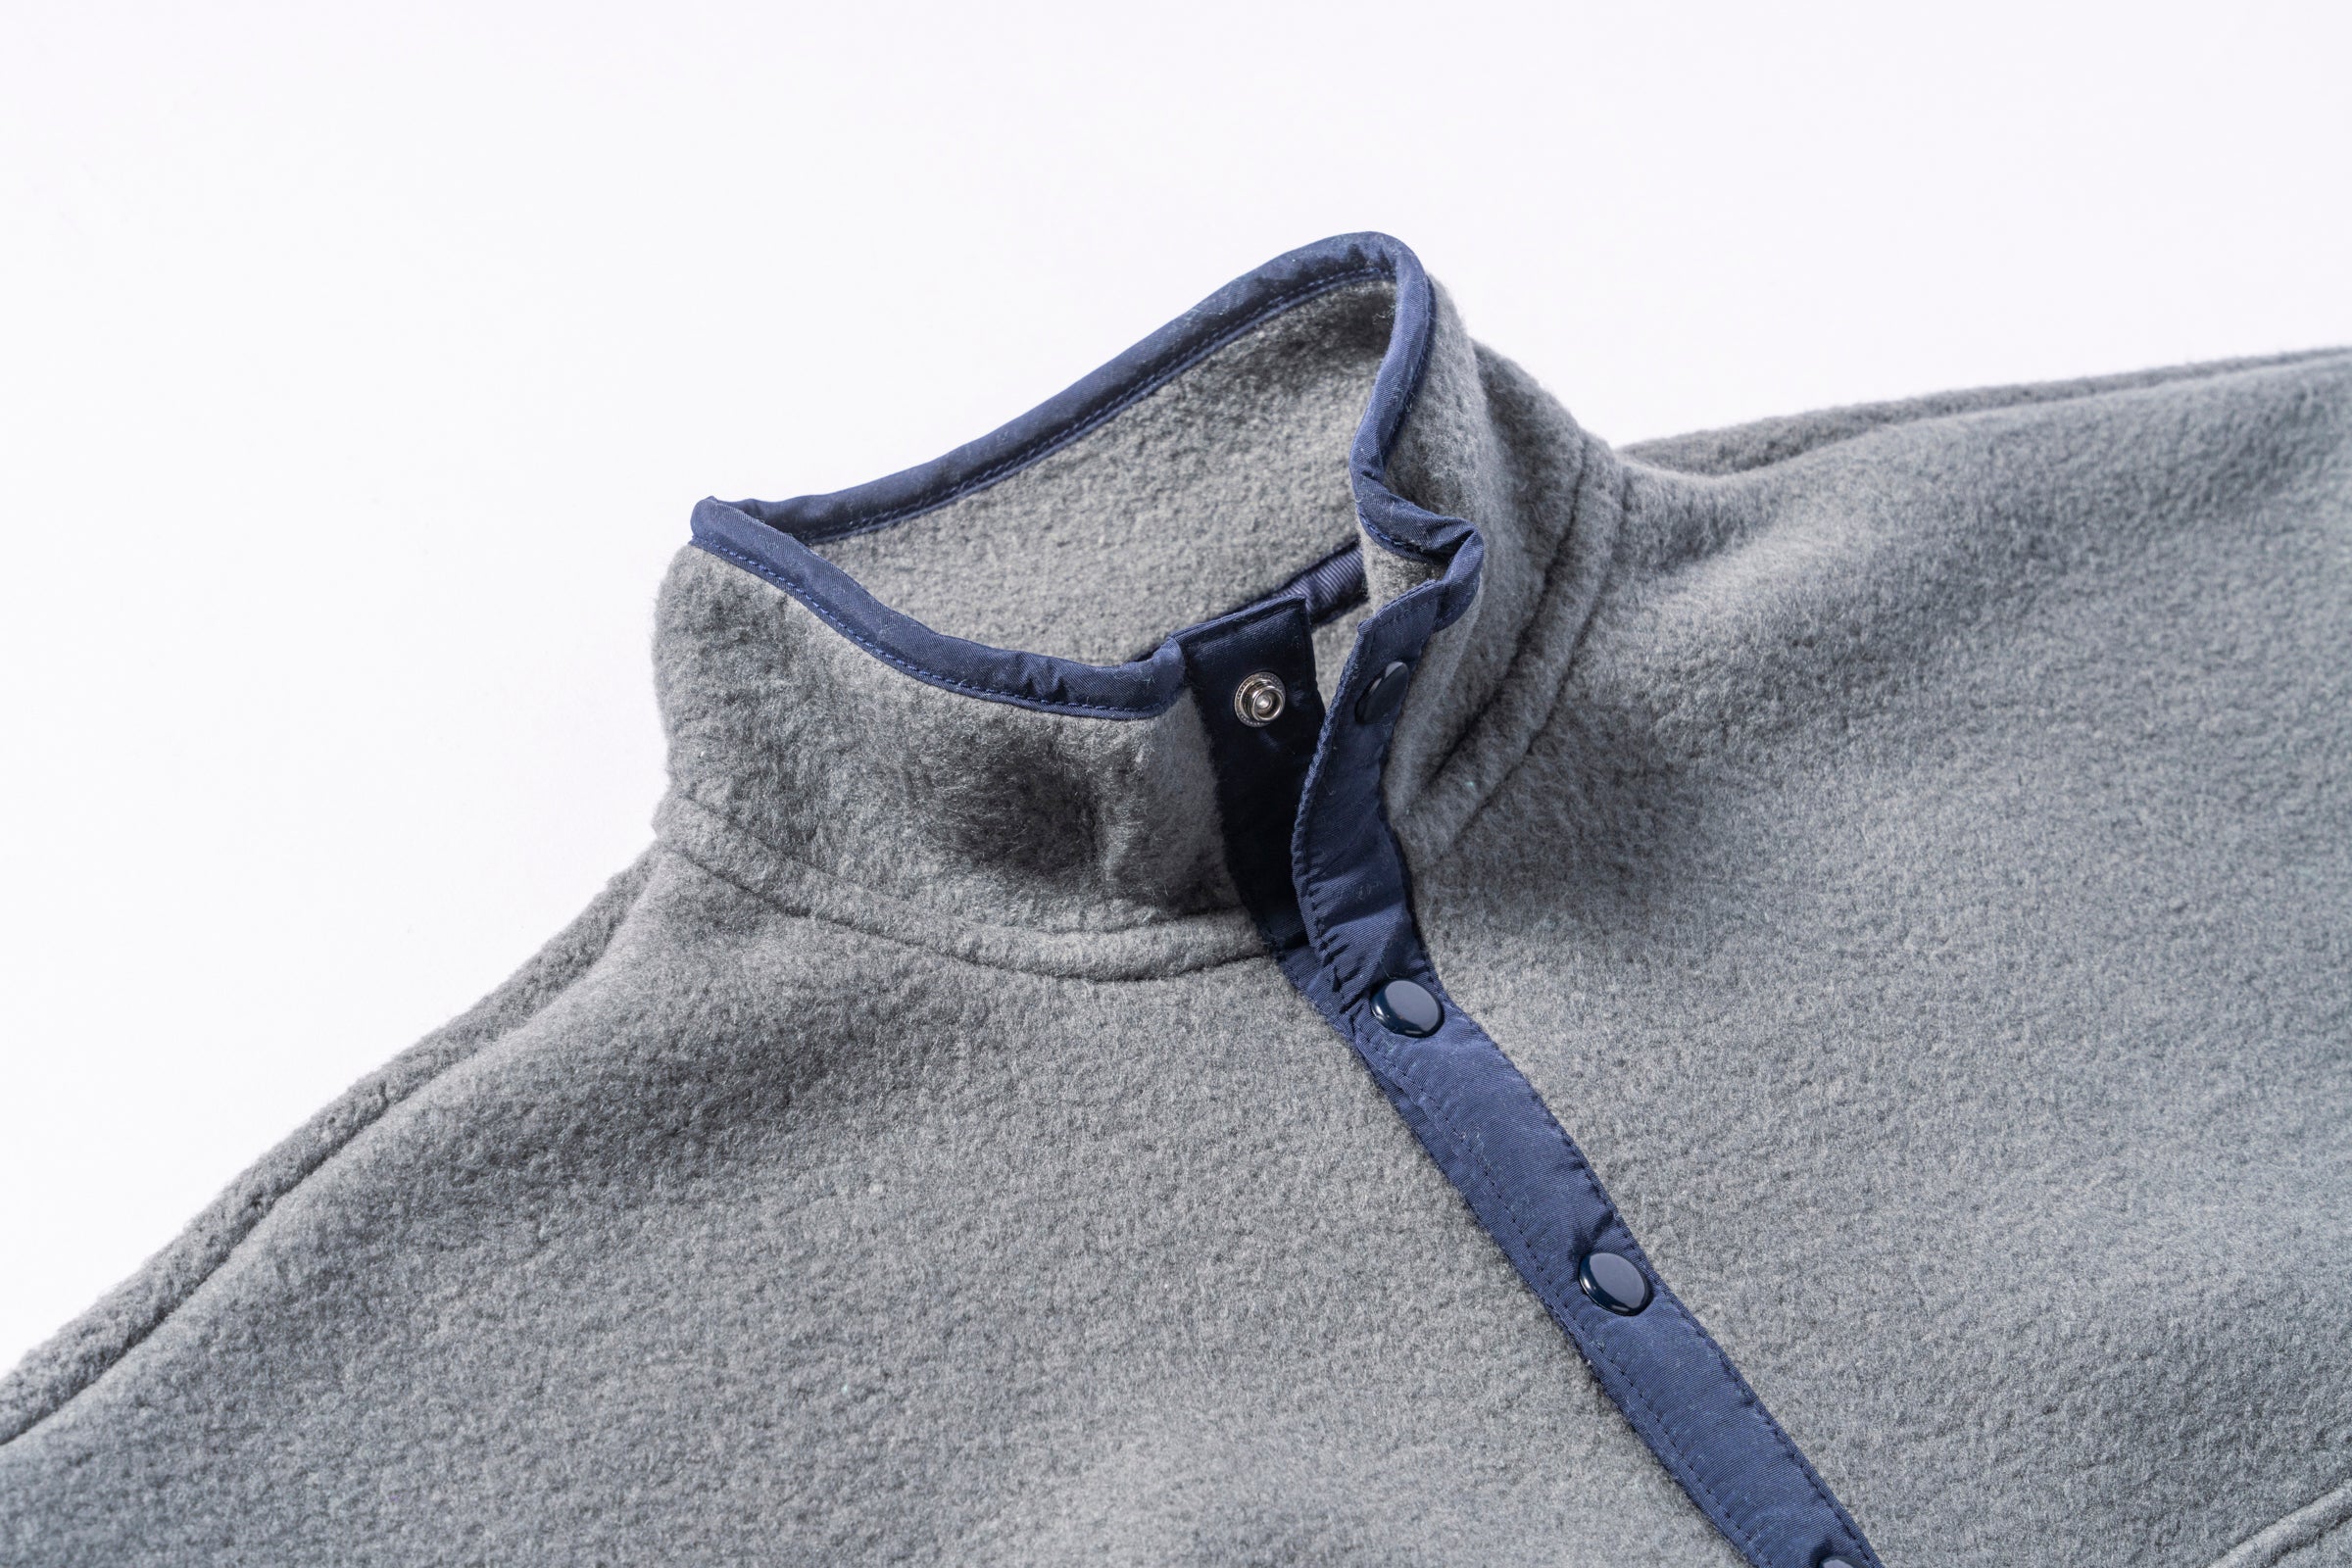 SNAP FRONT PULL-OVER FLEECE – The Real McCoy's